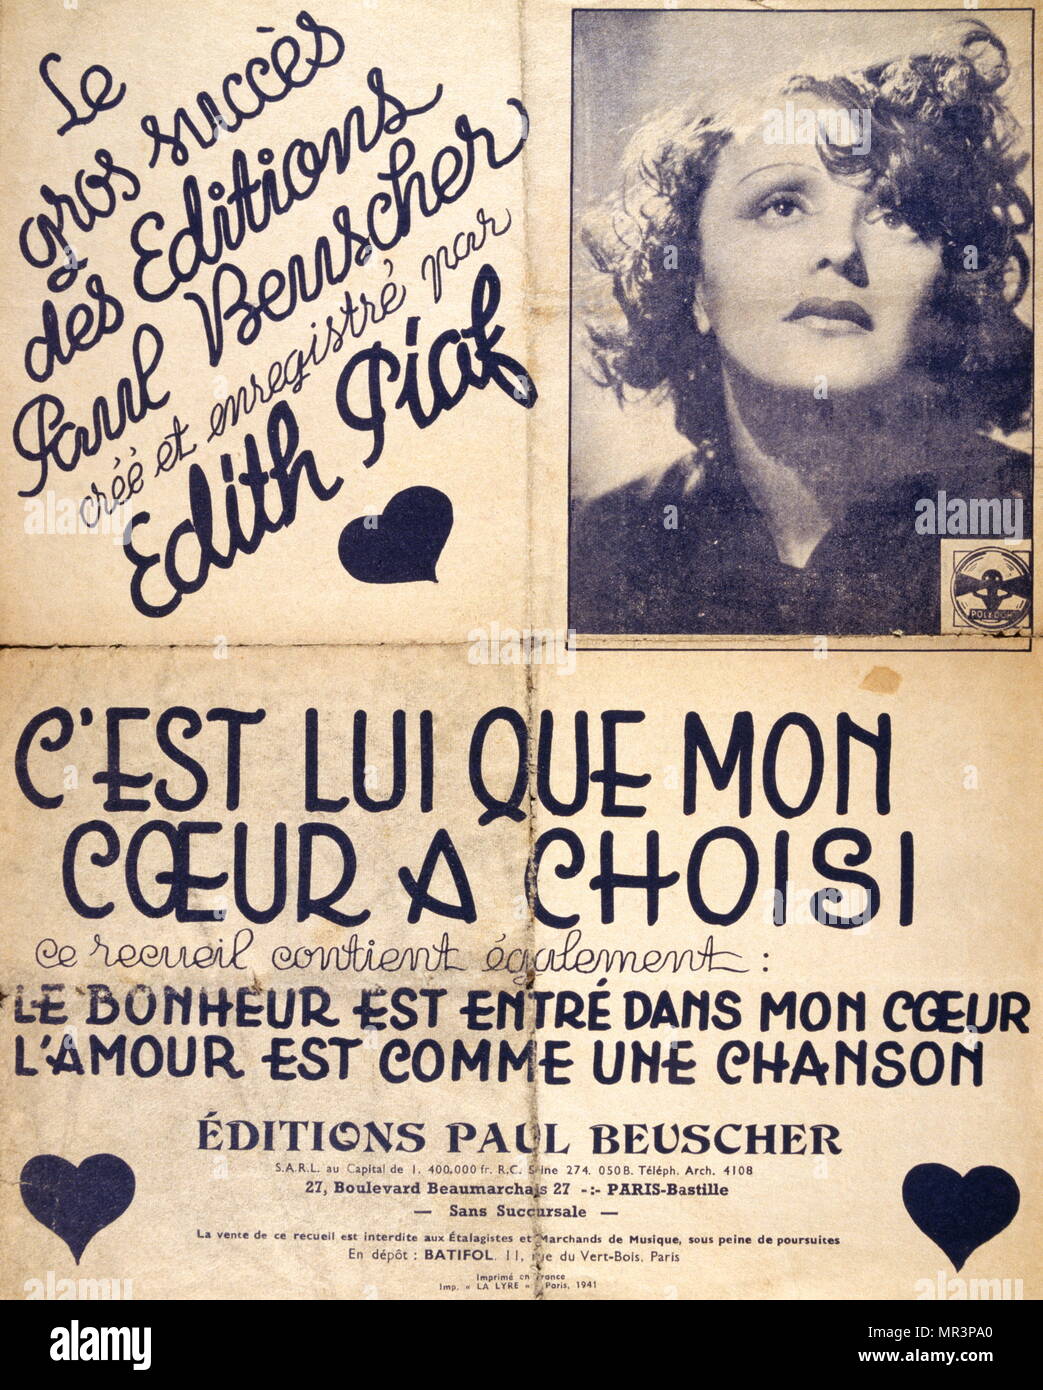 Music Book For Mon Coeur A Choisis Sung By French Singer